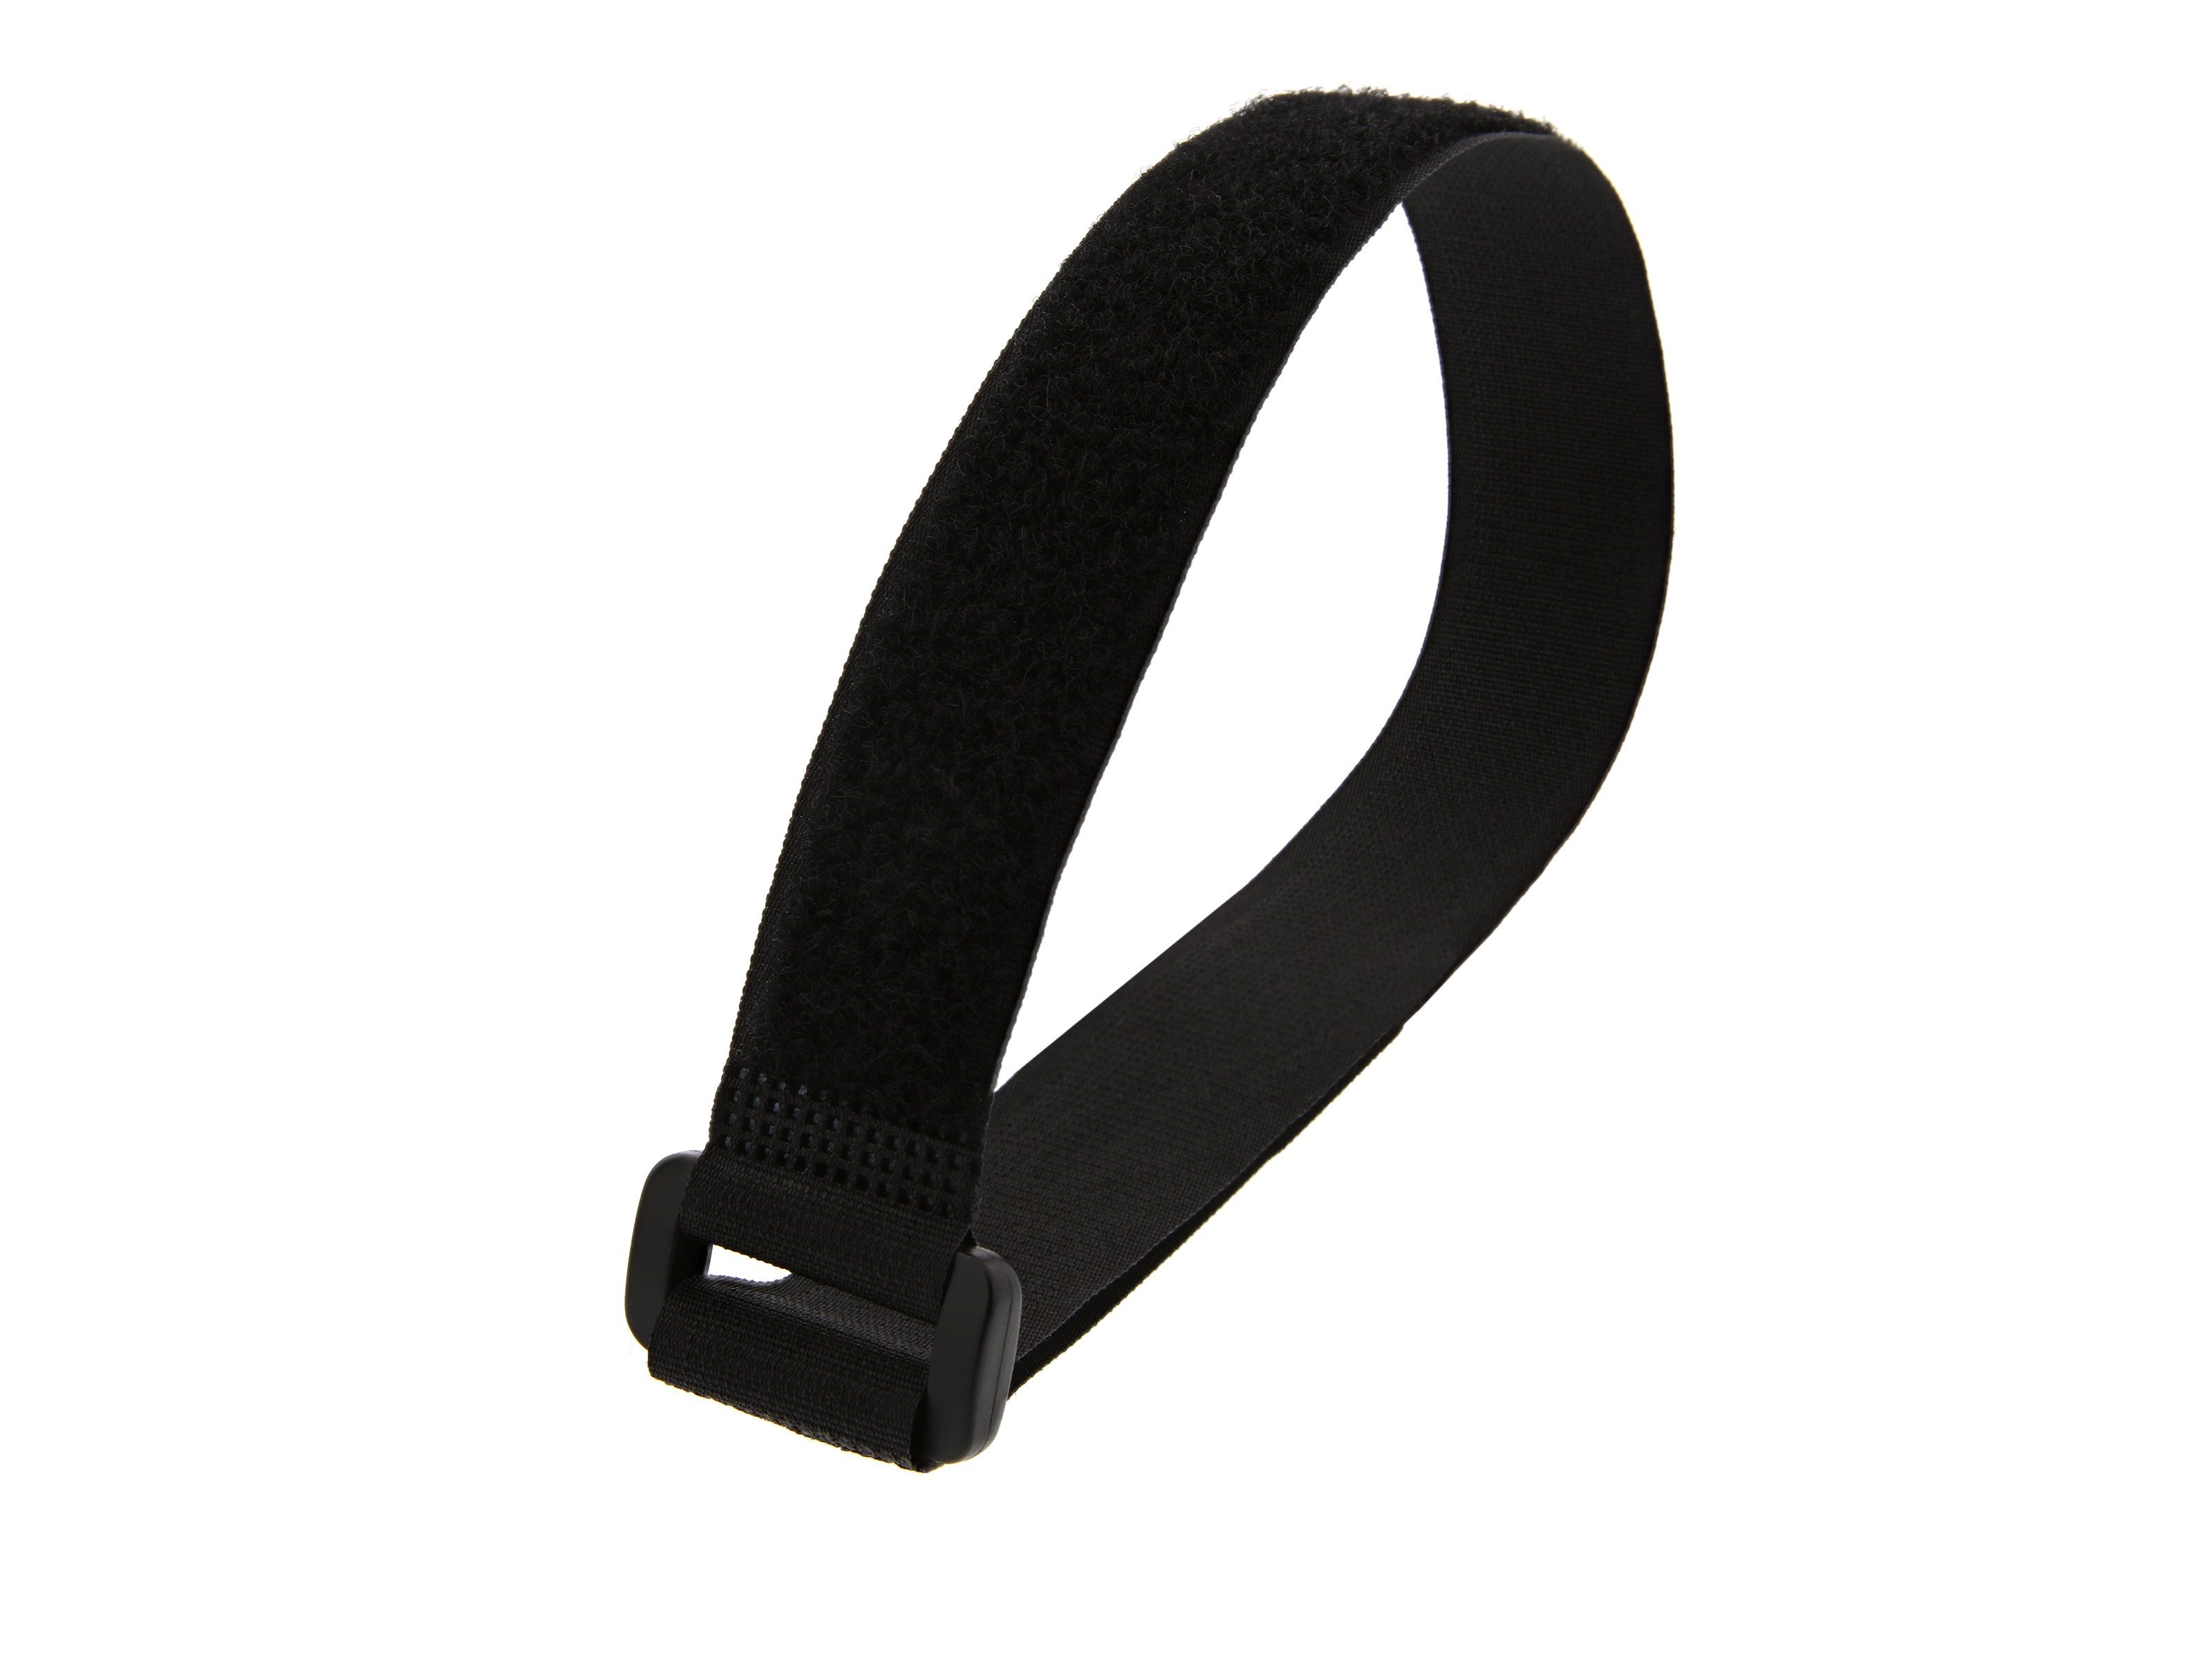 Strap Extender: Add inches to Hook & Loop Wraps or Belts